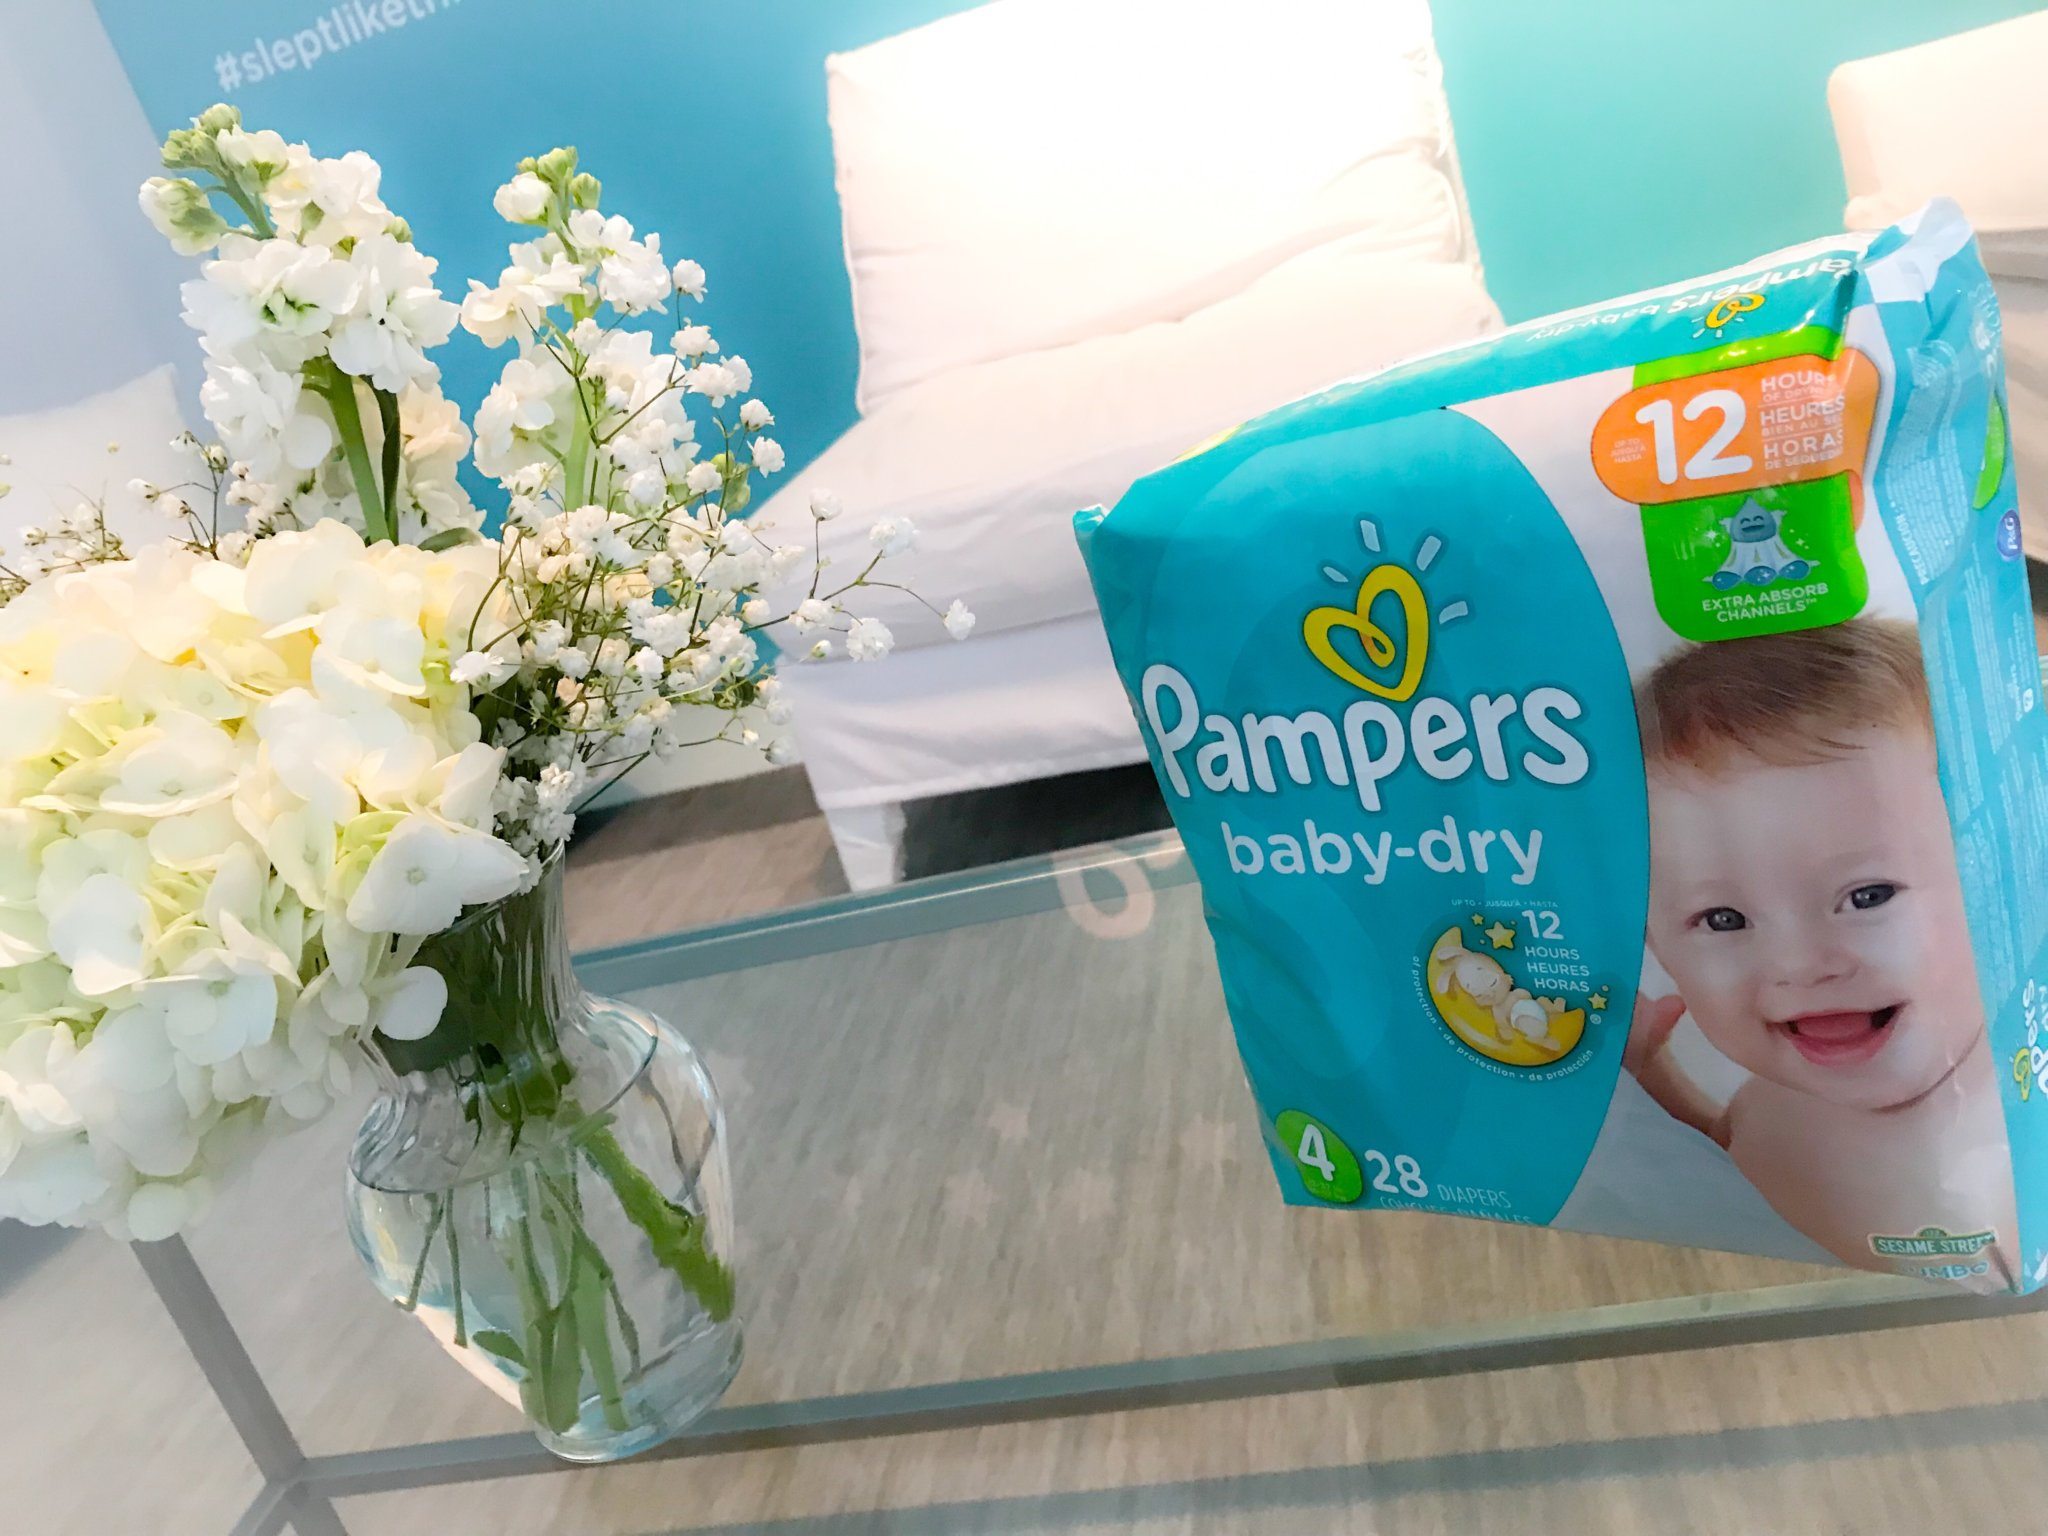 Draaien Ithaca hand How my baby #SleptLikeThis with Pampers Baby Dry | Gotham Love